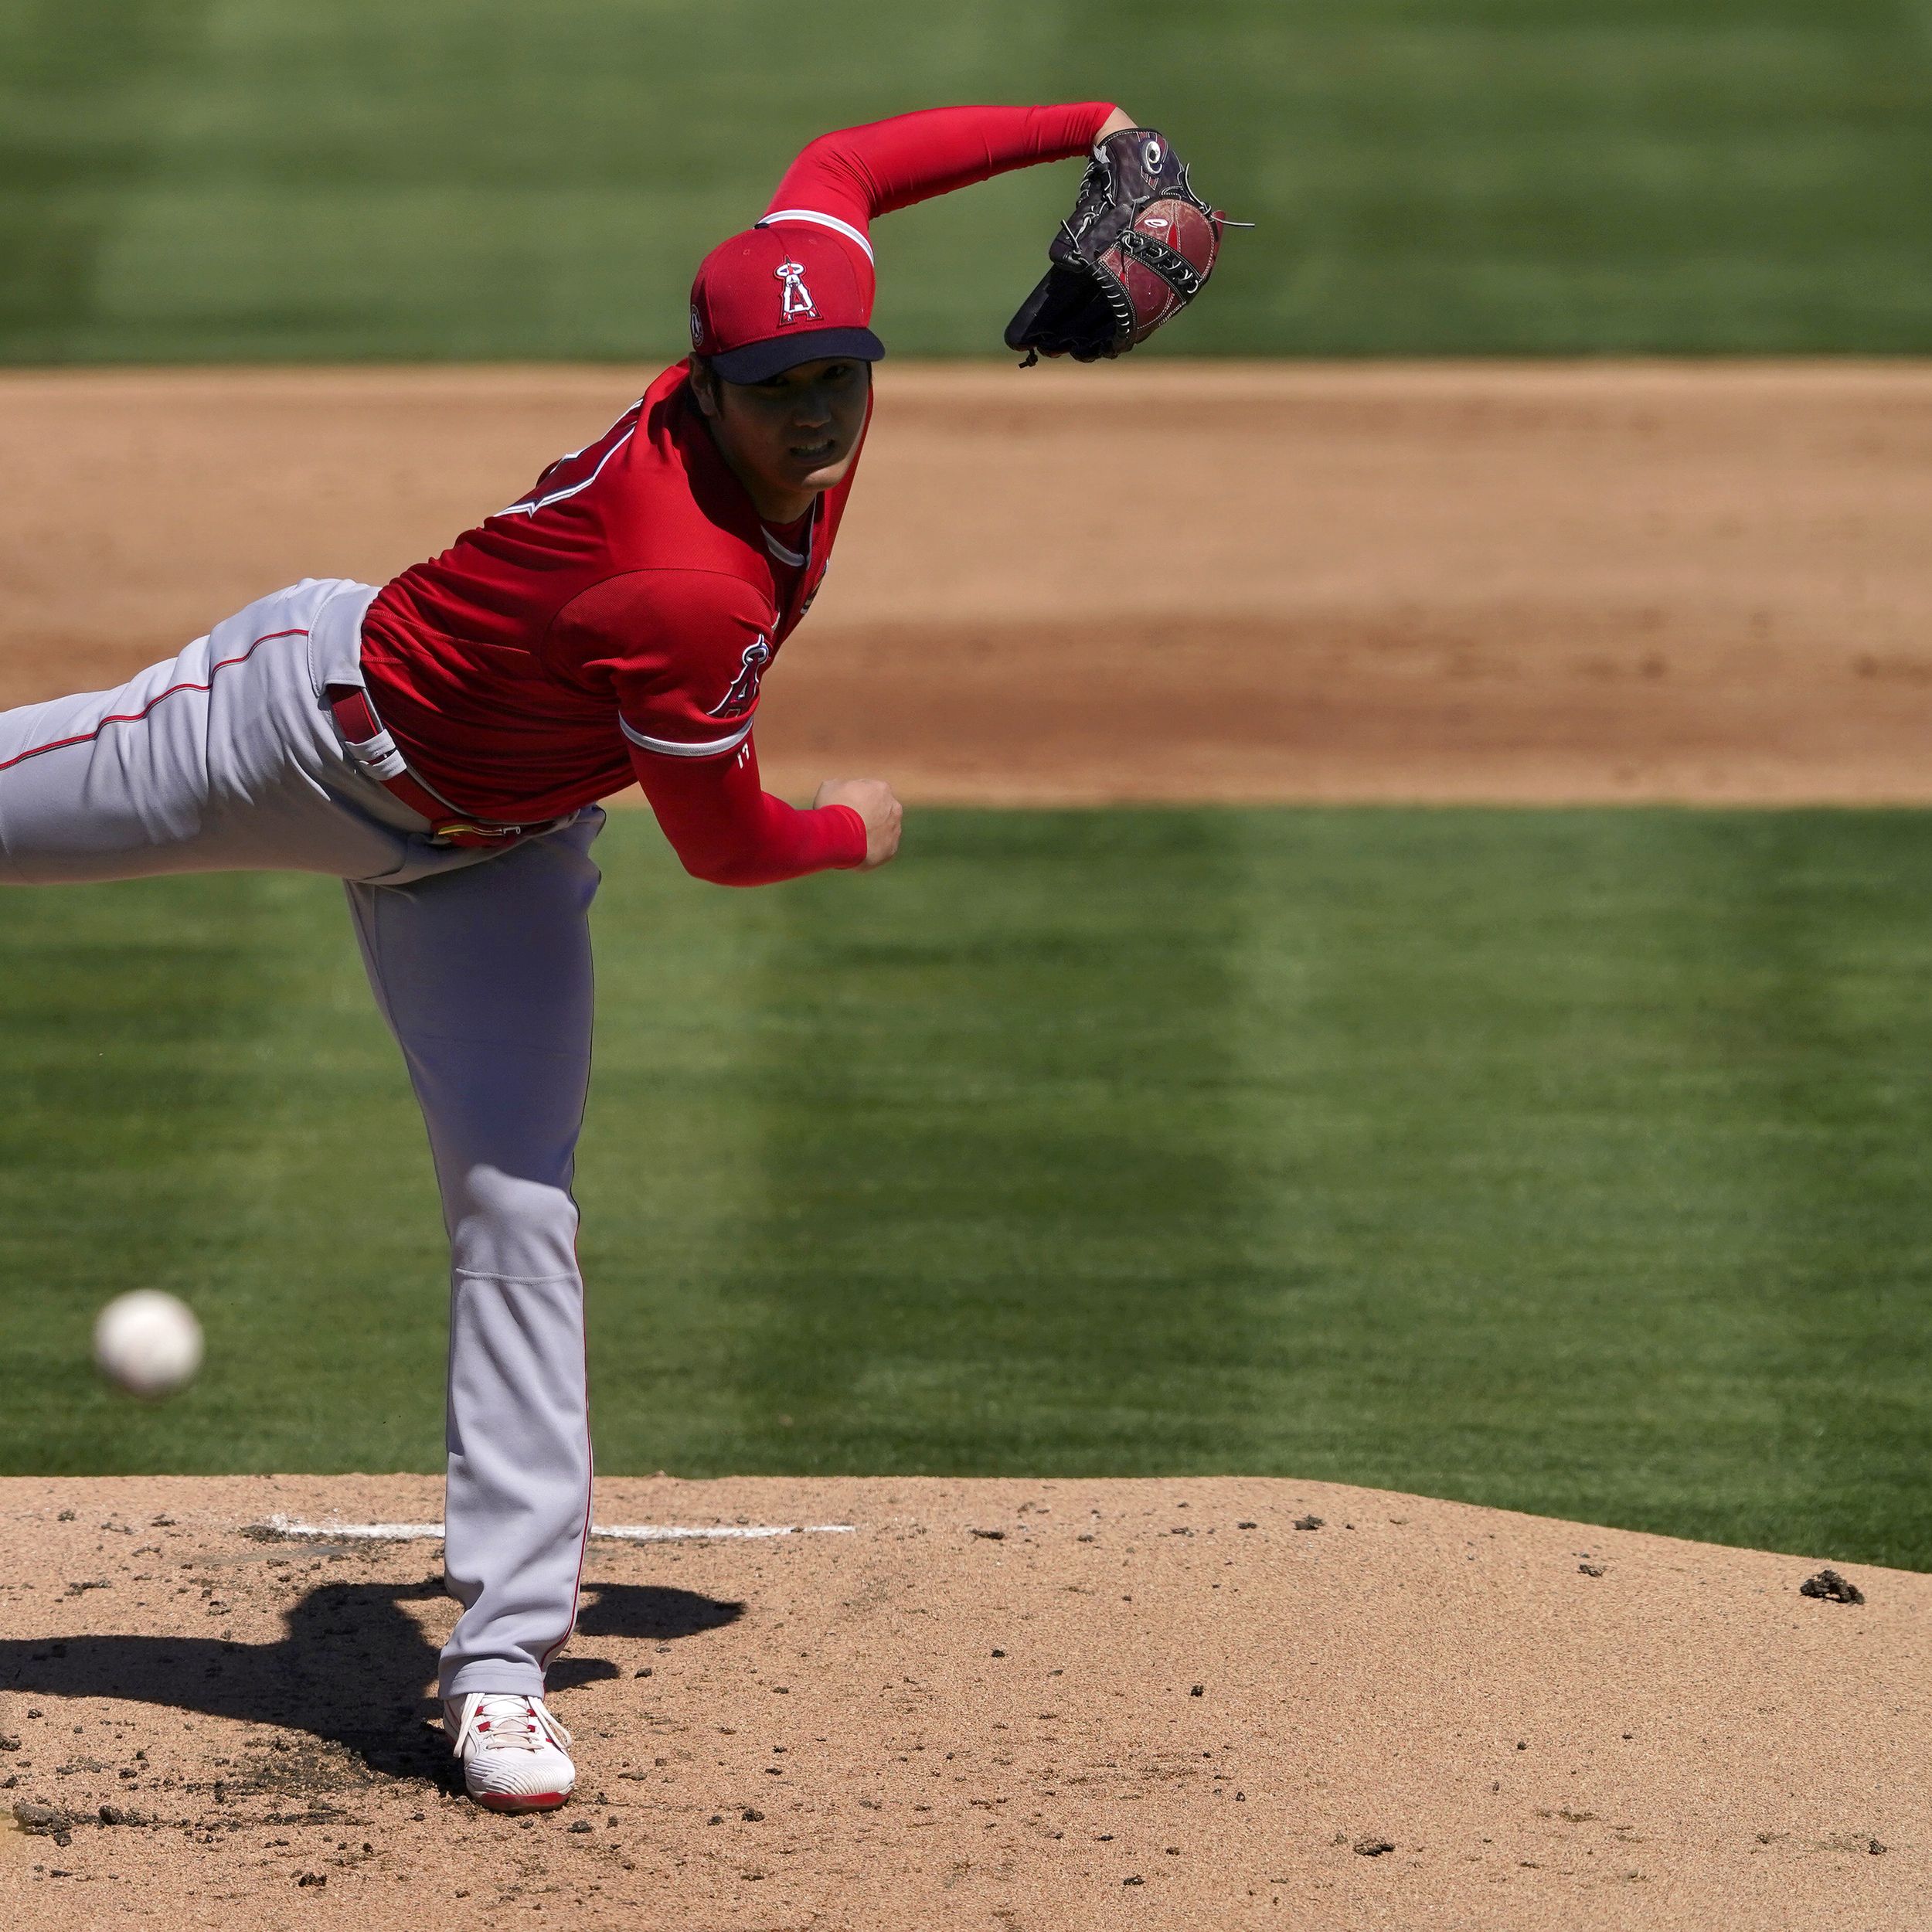 Jose Urquidy's strong last start a positive finish to spring training